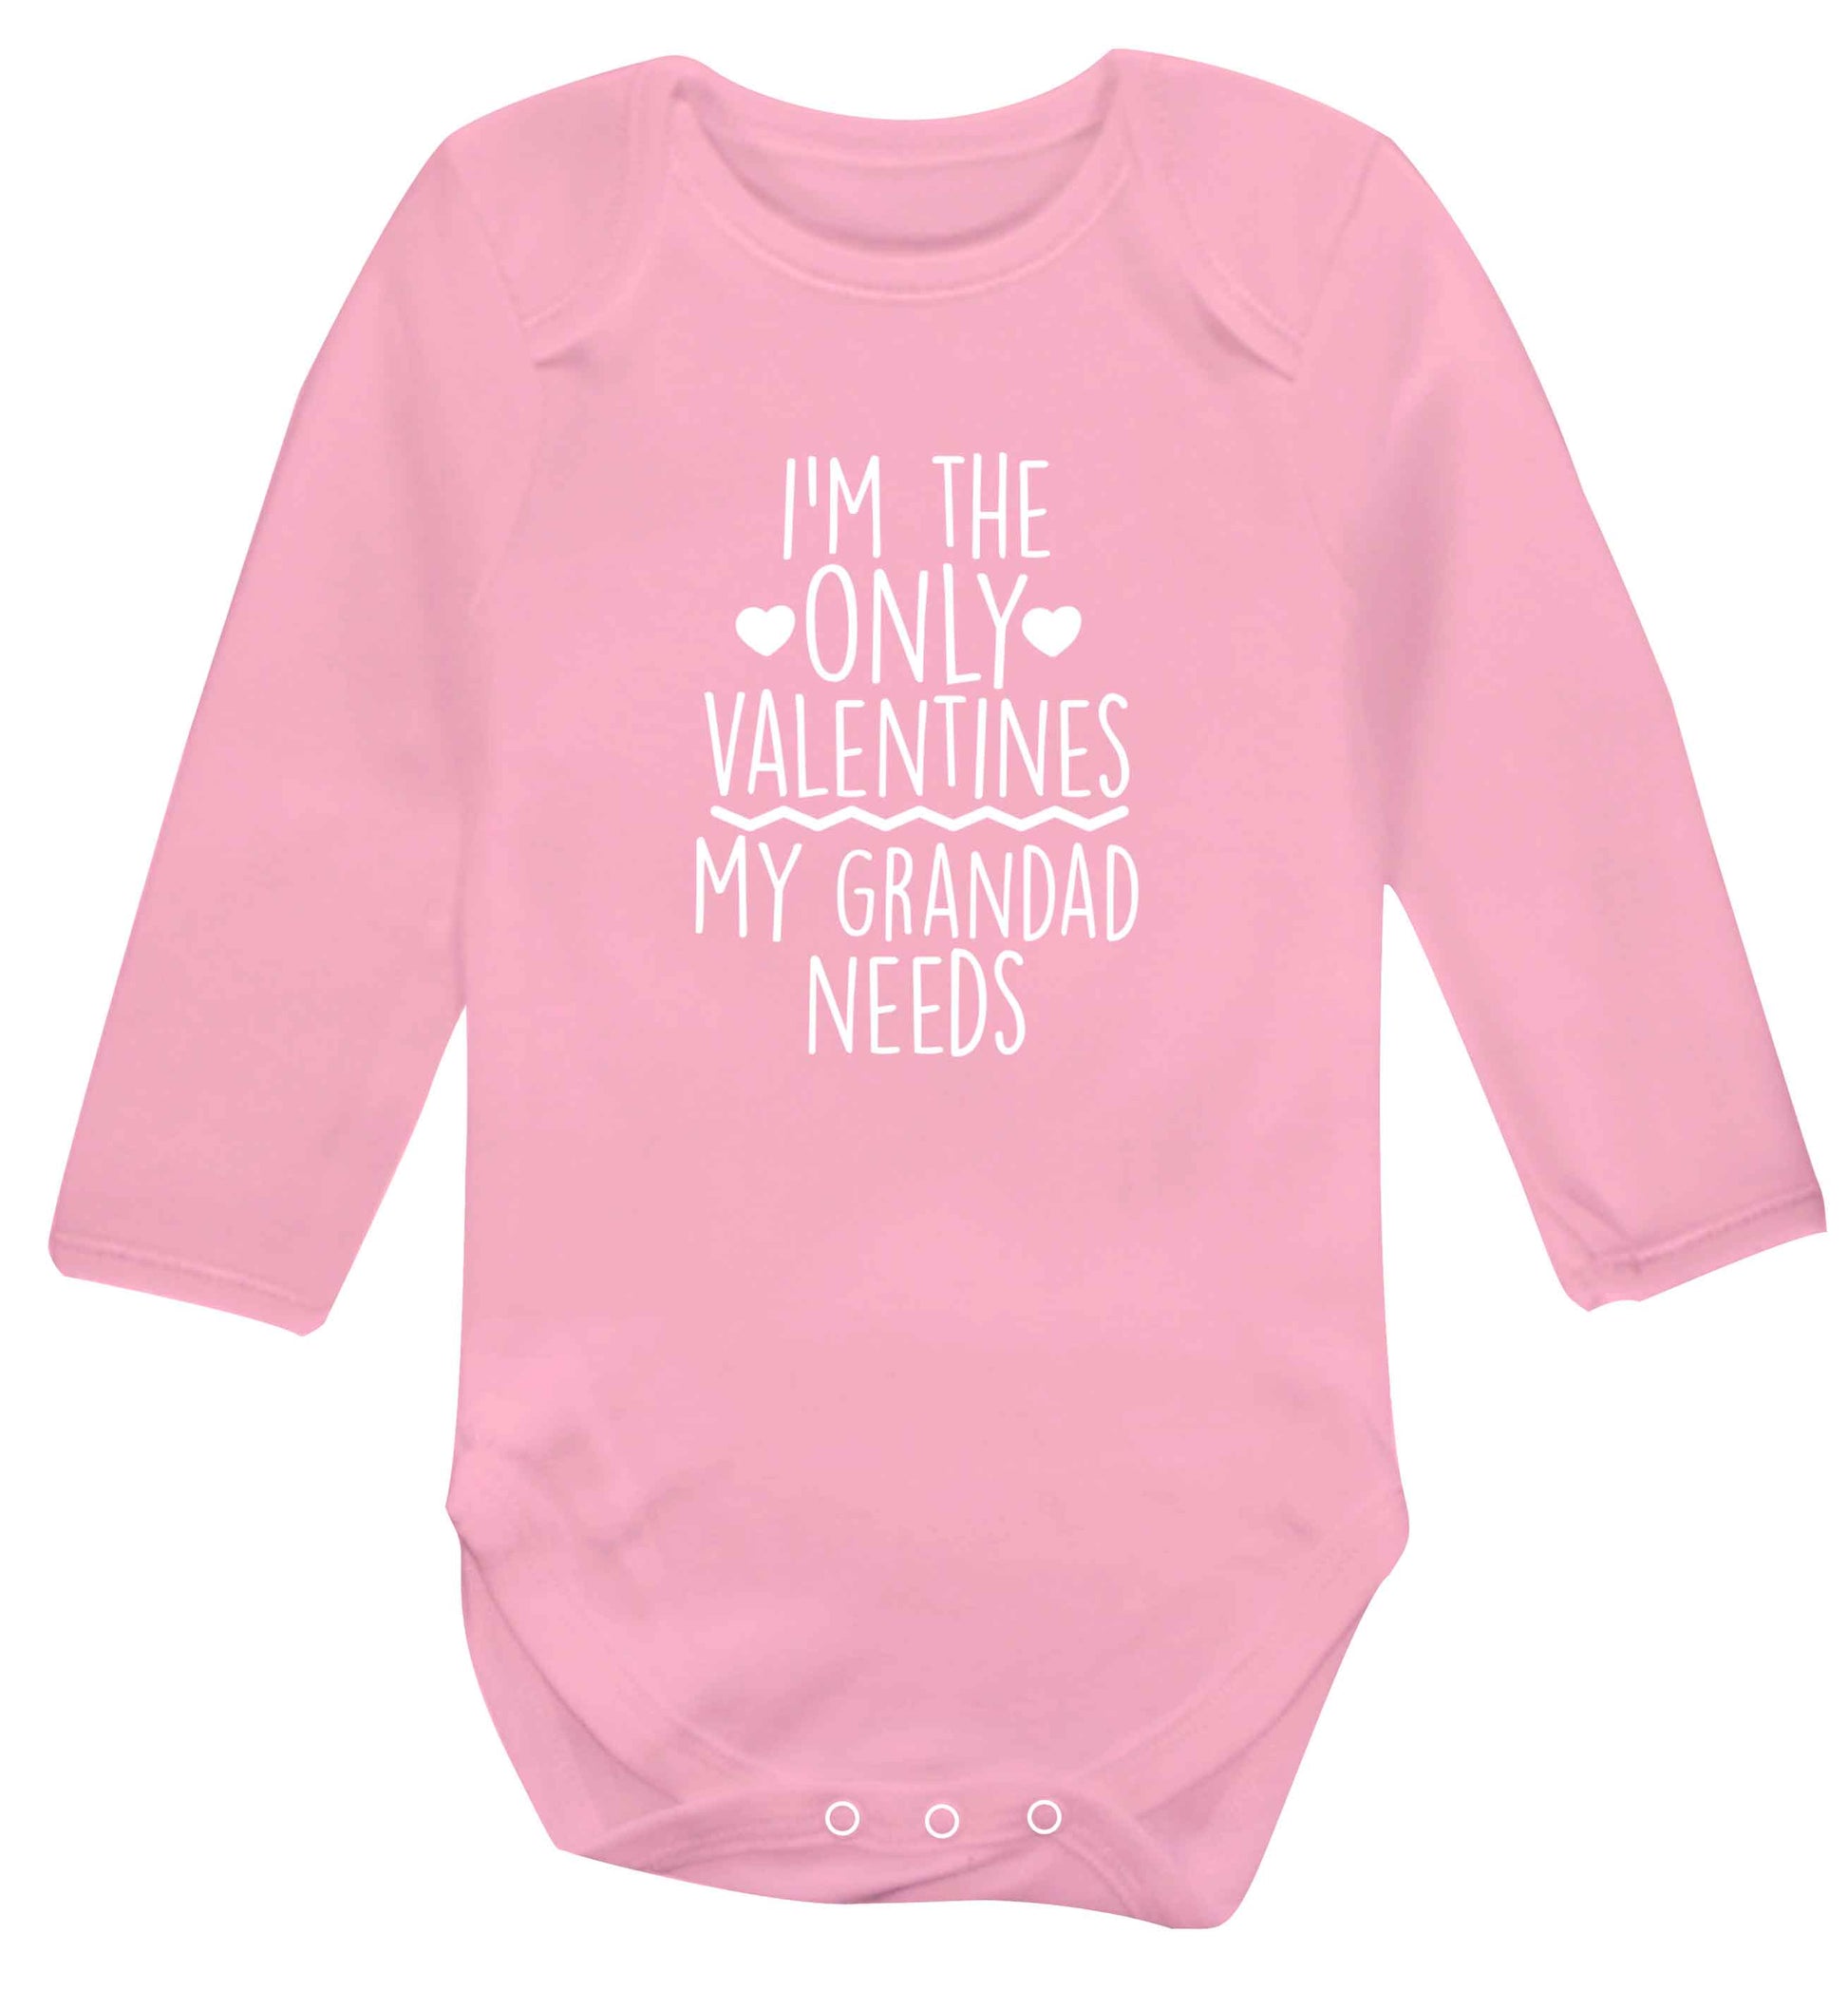 I'm the only valentines my grandad needs baby vest long sleeved pale pink 6-12 months